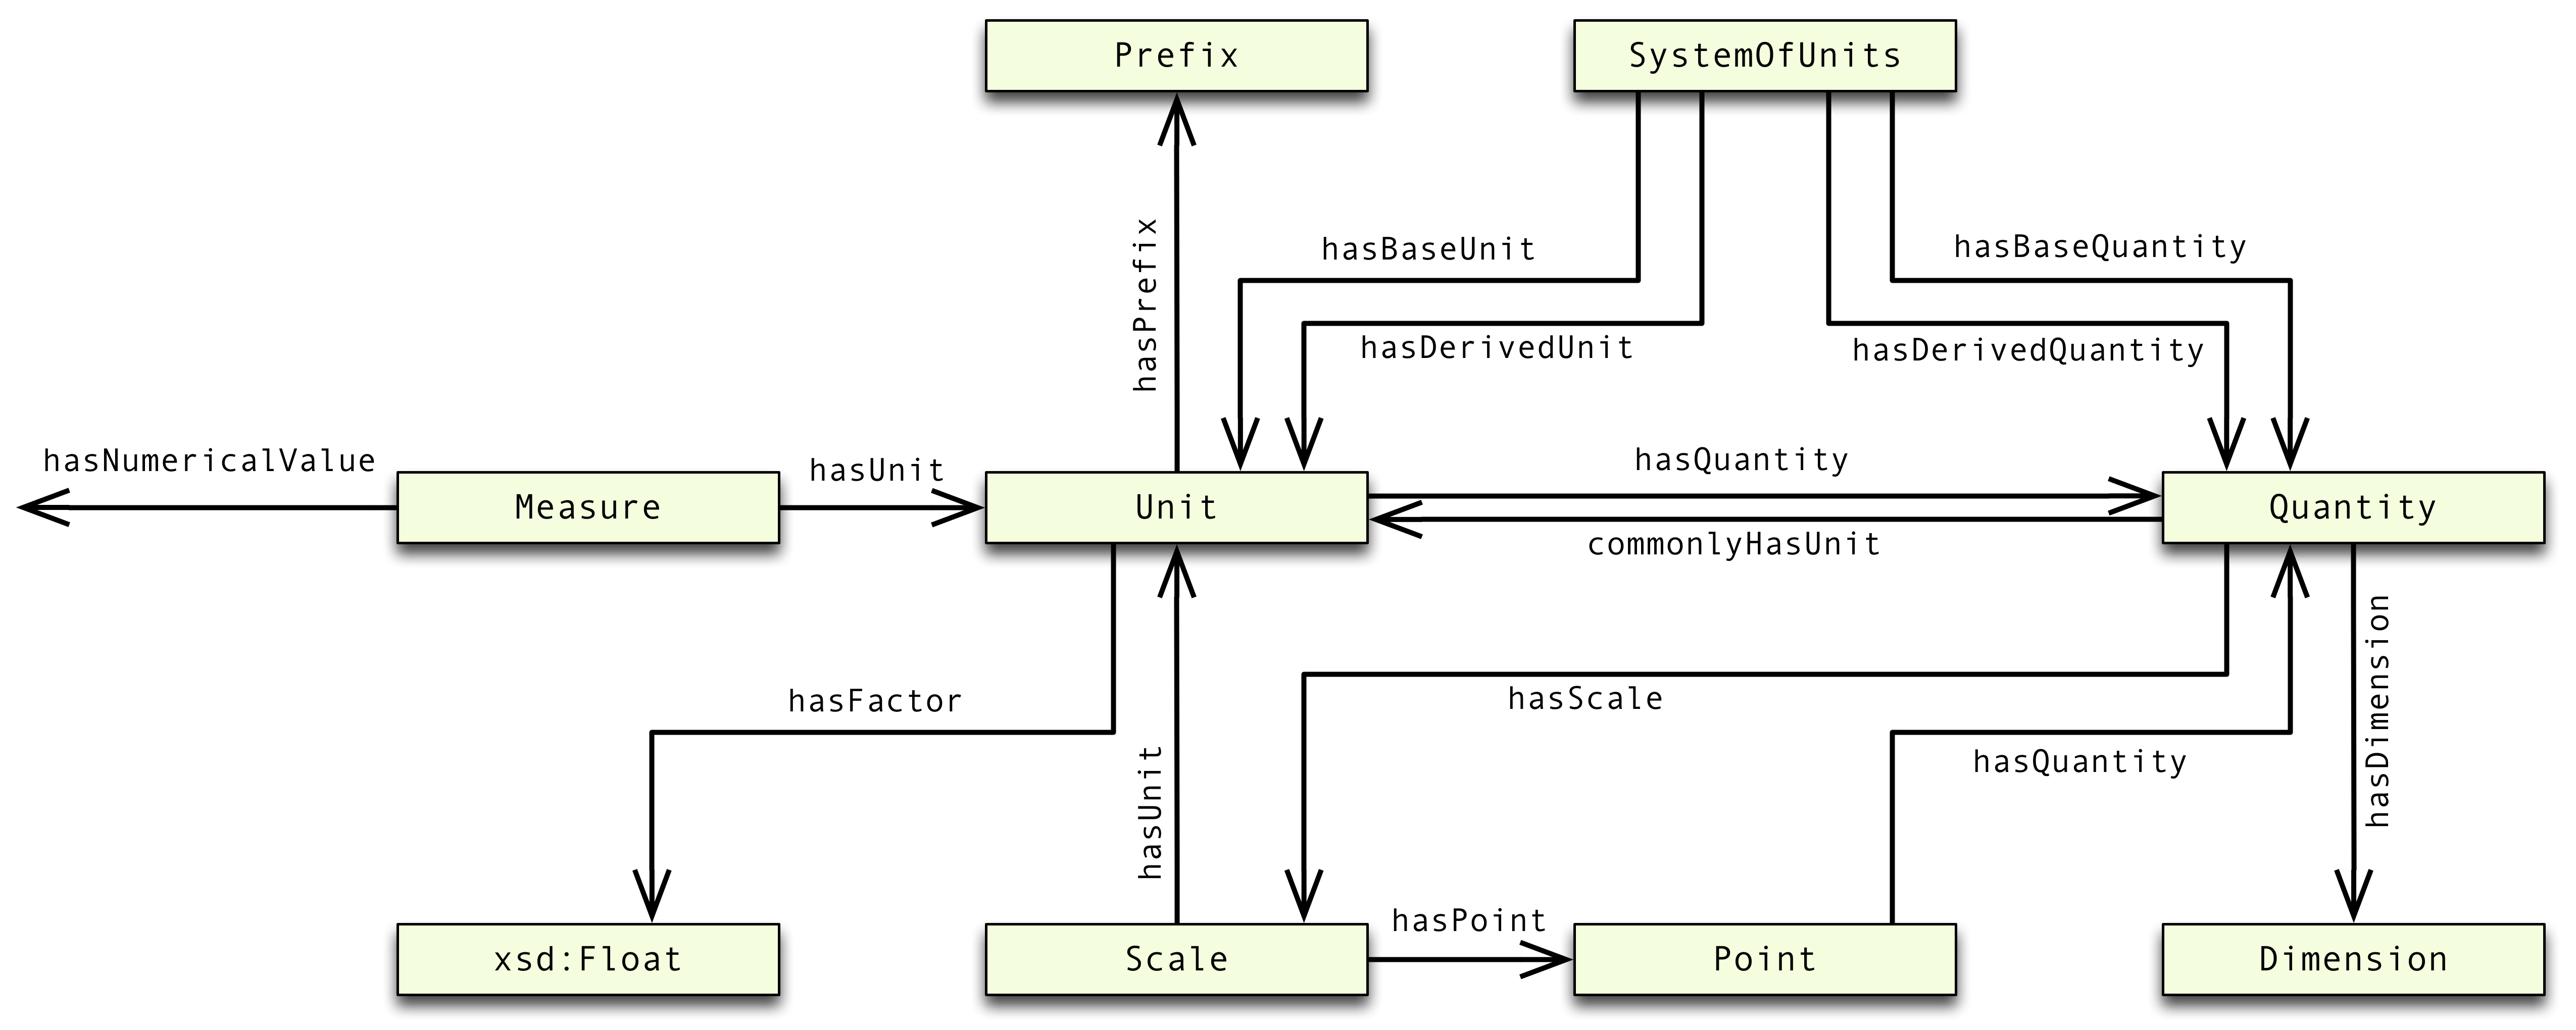 The UML structure of the OM ontology